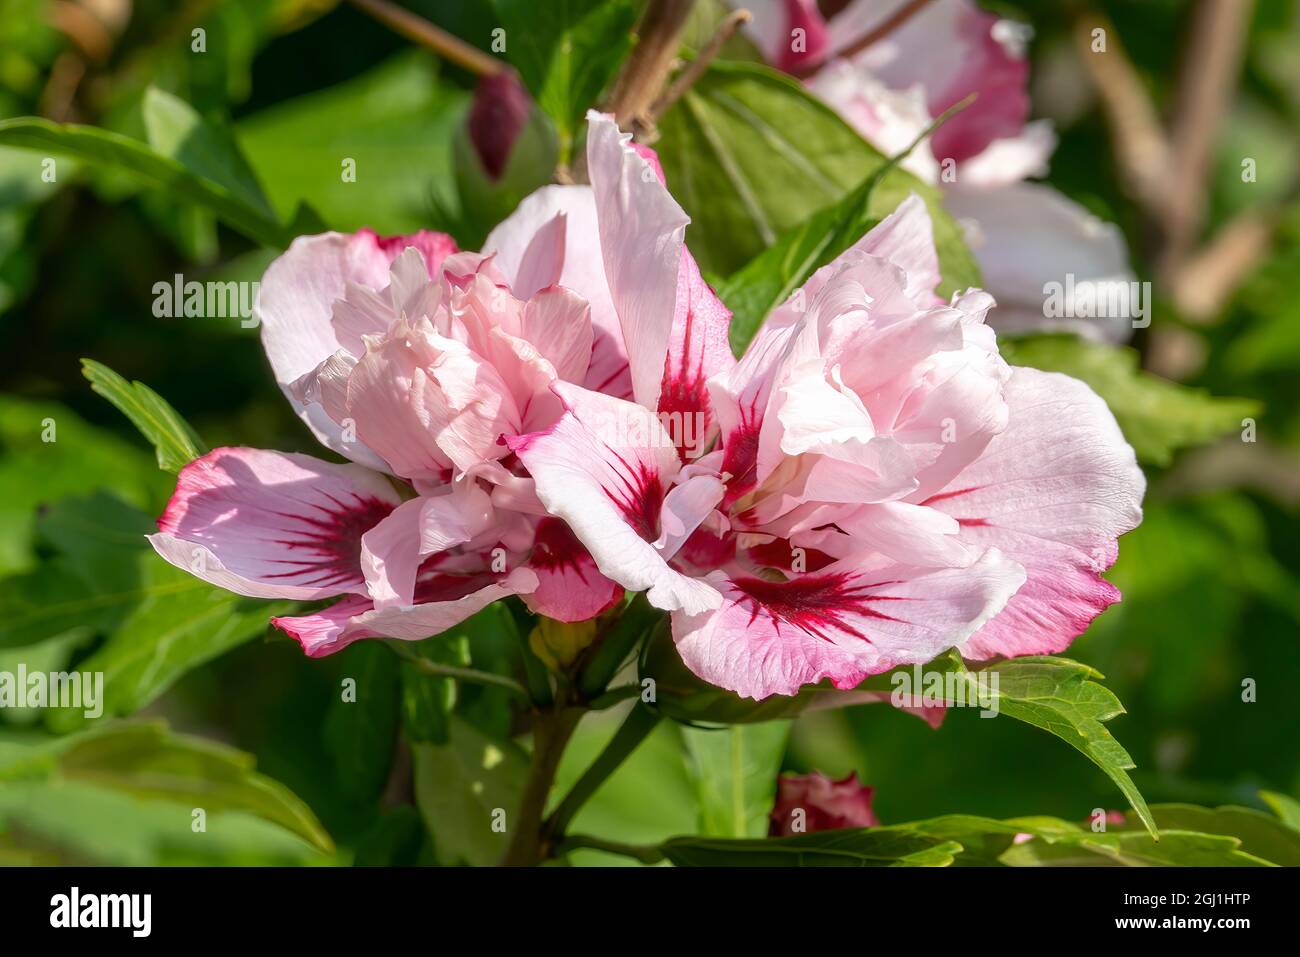 Hibiscus 'Lady Stanley' a summer flowering shrub plant with a pink red summertime flower commonly known as rose of Sharon, stock photo image Stock Photo